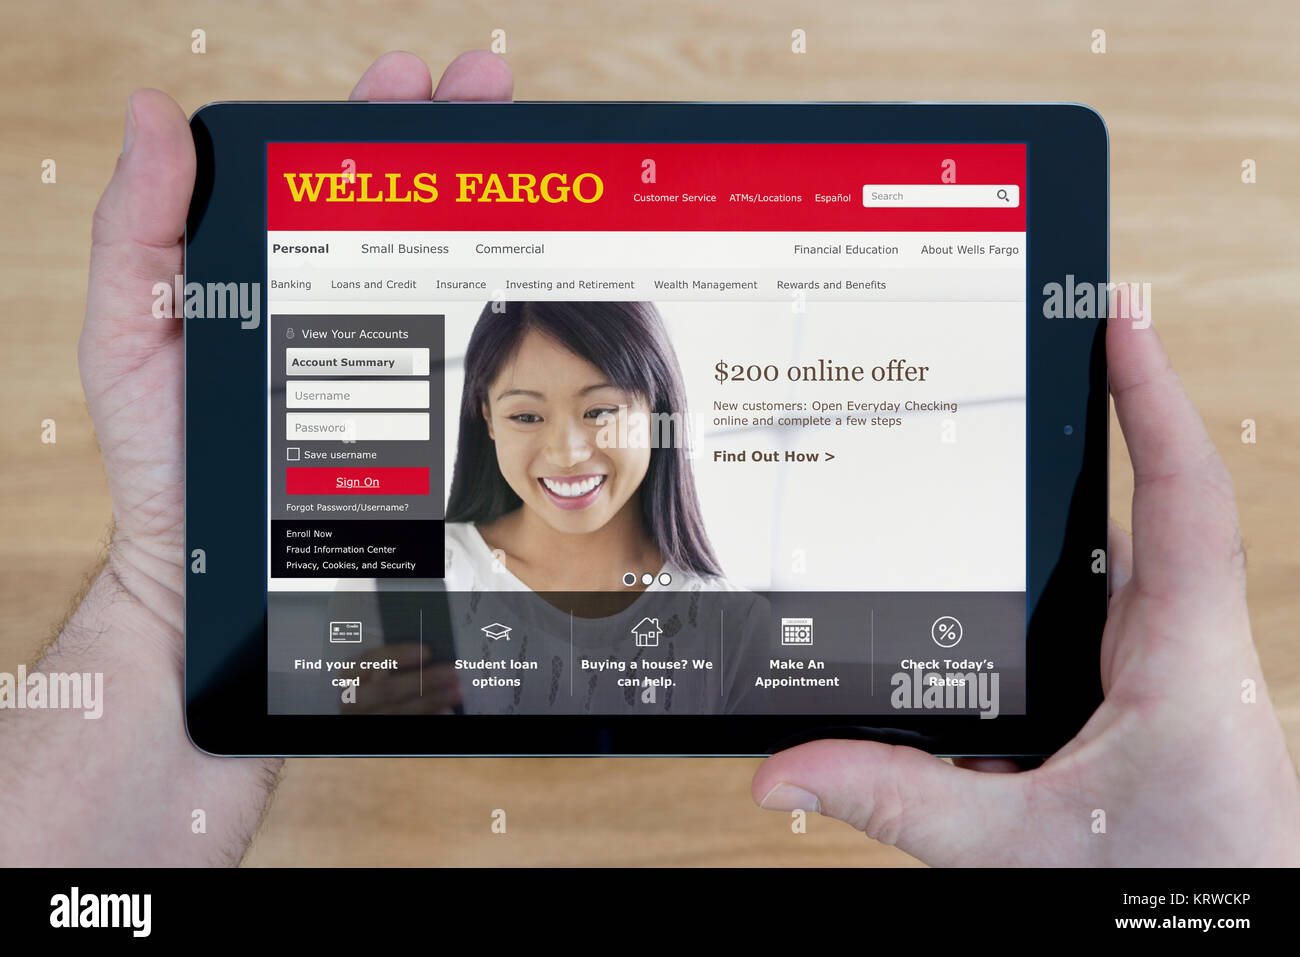 A man looks at the Wells Fargo bank website on his iPad tablet device, shot against a wooden table top background (Editorial use only) Stock Photo